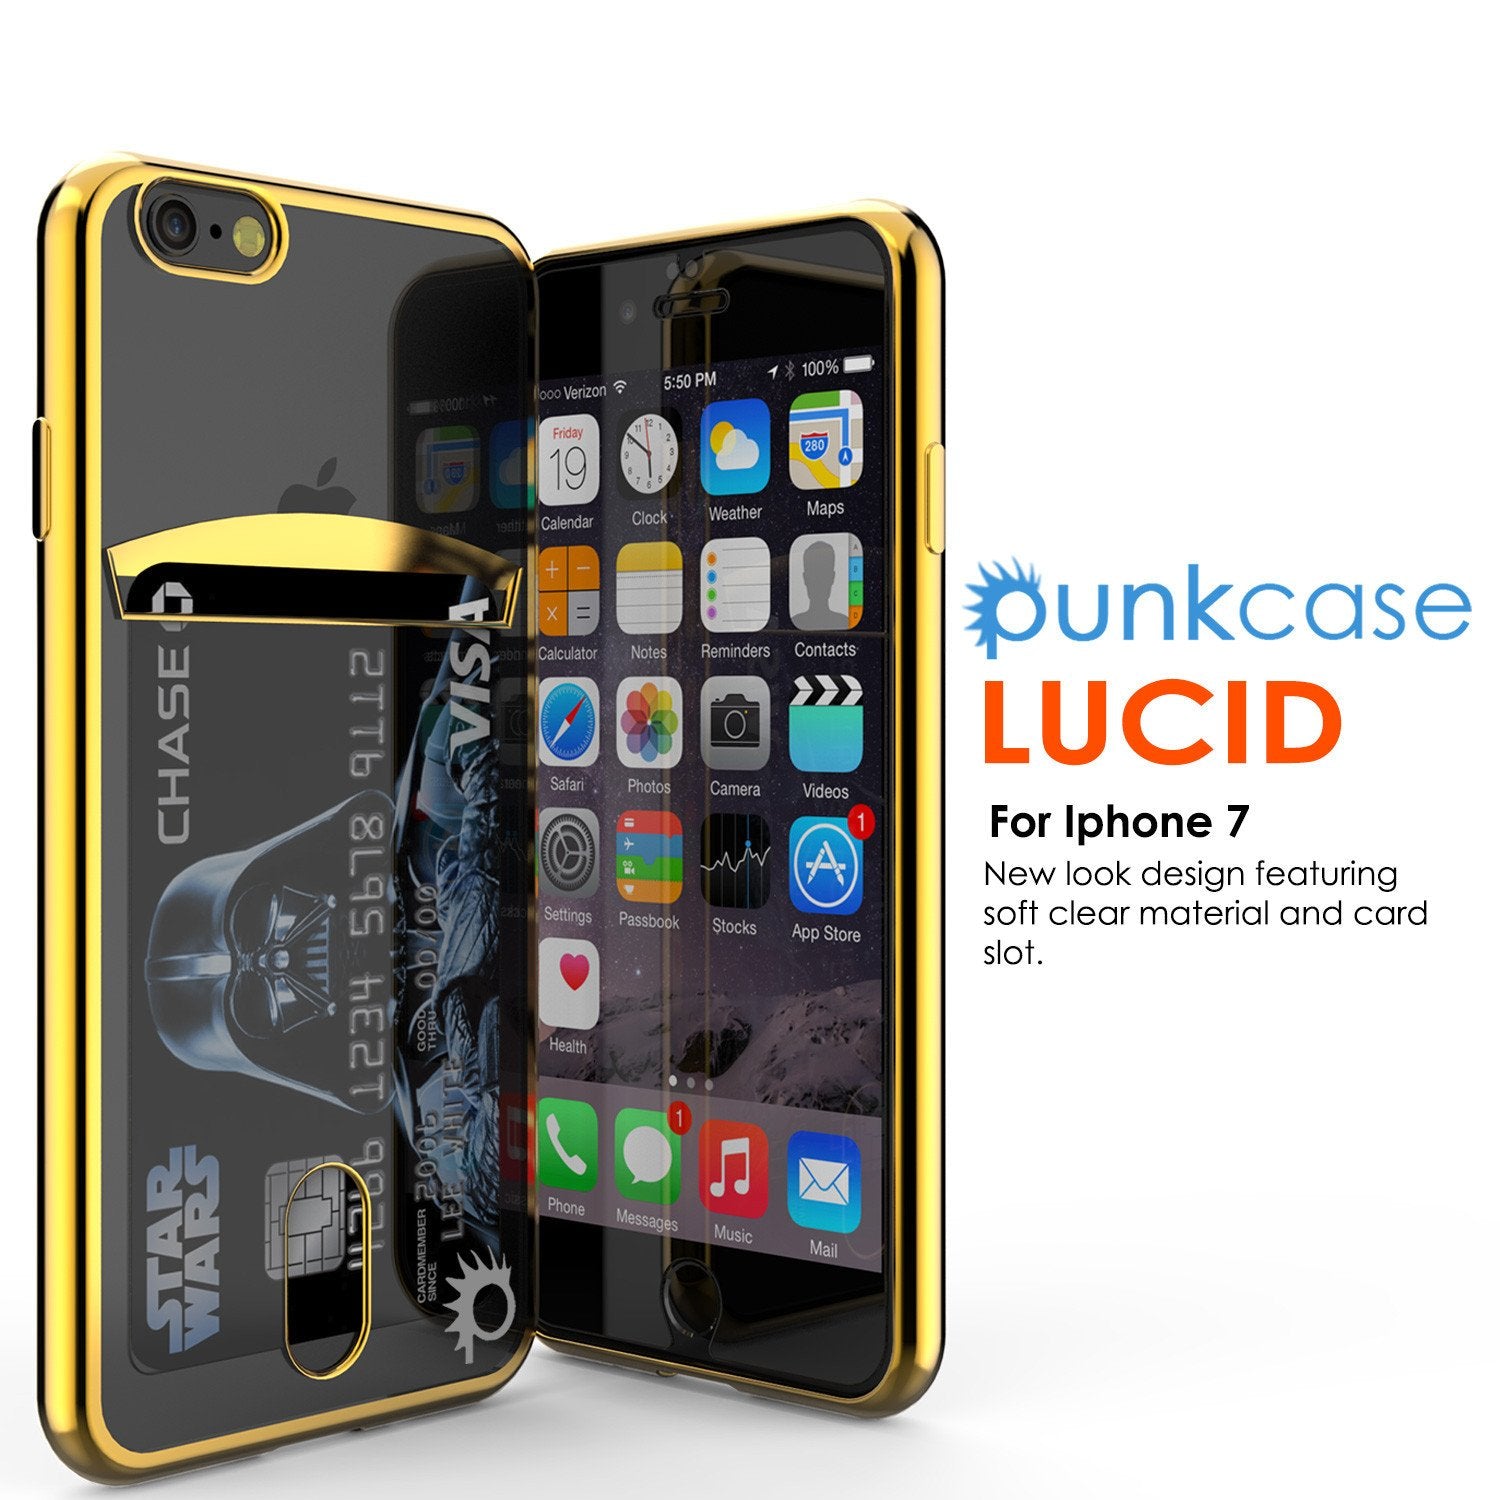 iPhone 7 Case, PUNKCASE® LUCID Gold Series for iPhone 7 Premium Impact Protective Armor Case Cover | Clear TPU | Lifetime Warranty Exchange | PUNK SHIELD Screen Protector | Ultra Fit